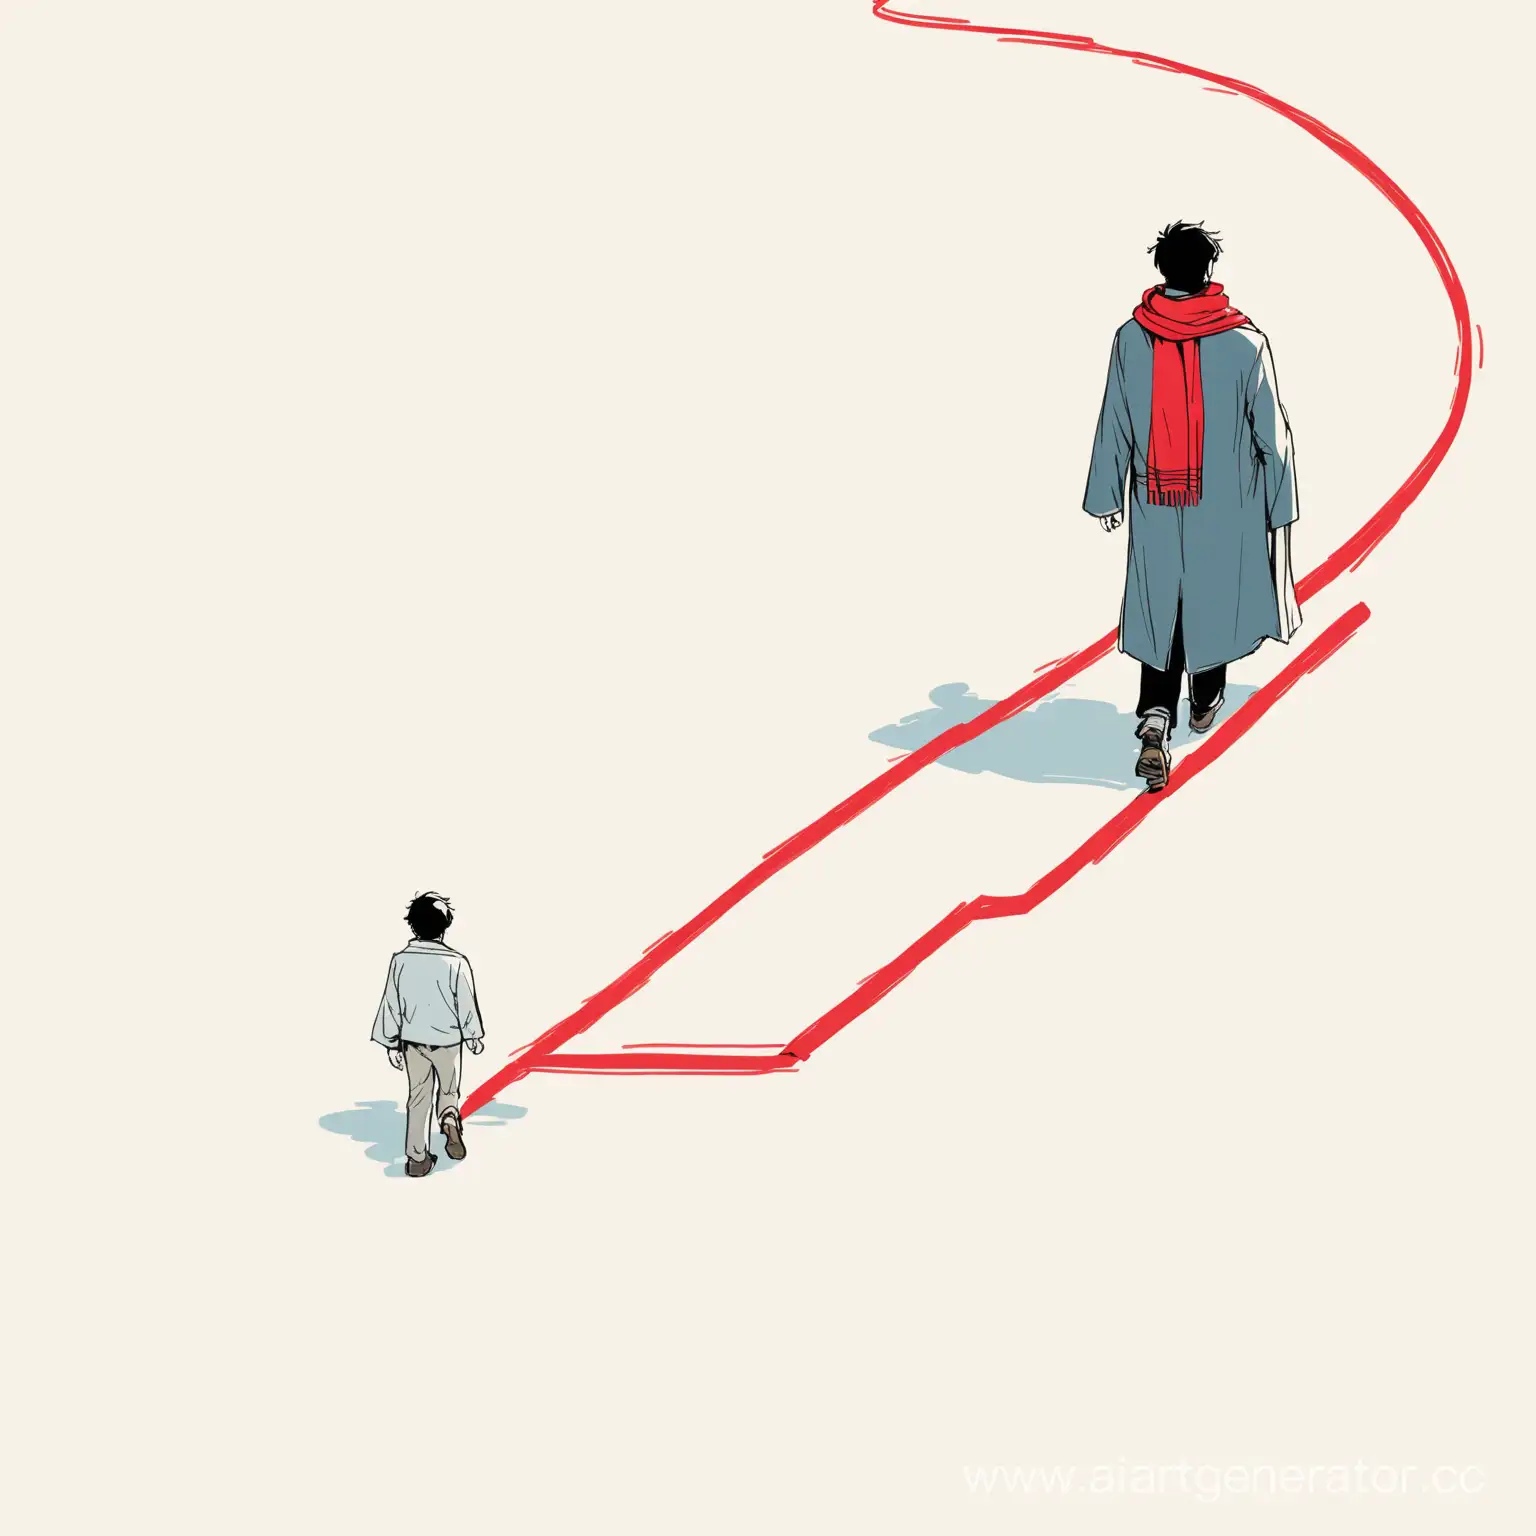 Wanderer-Following-the-Red-Line-with-Stylish-Scarf